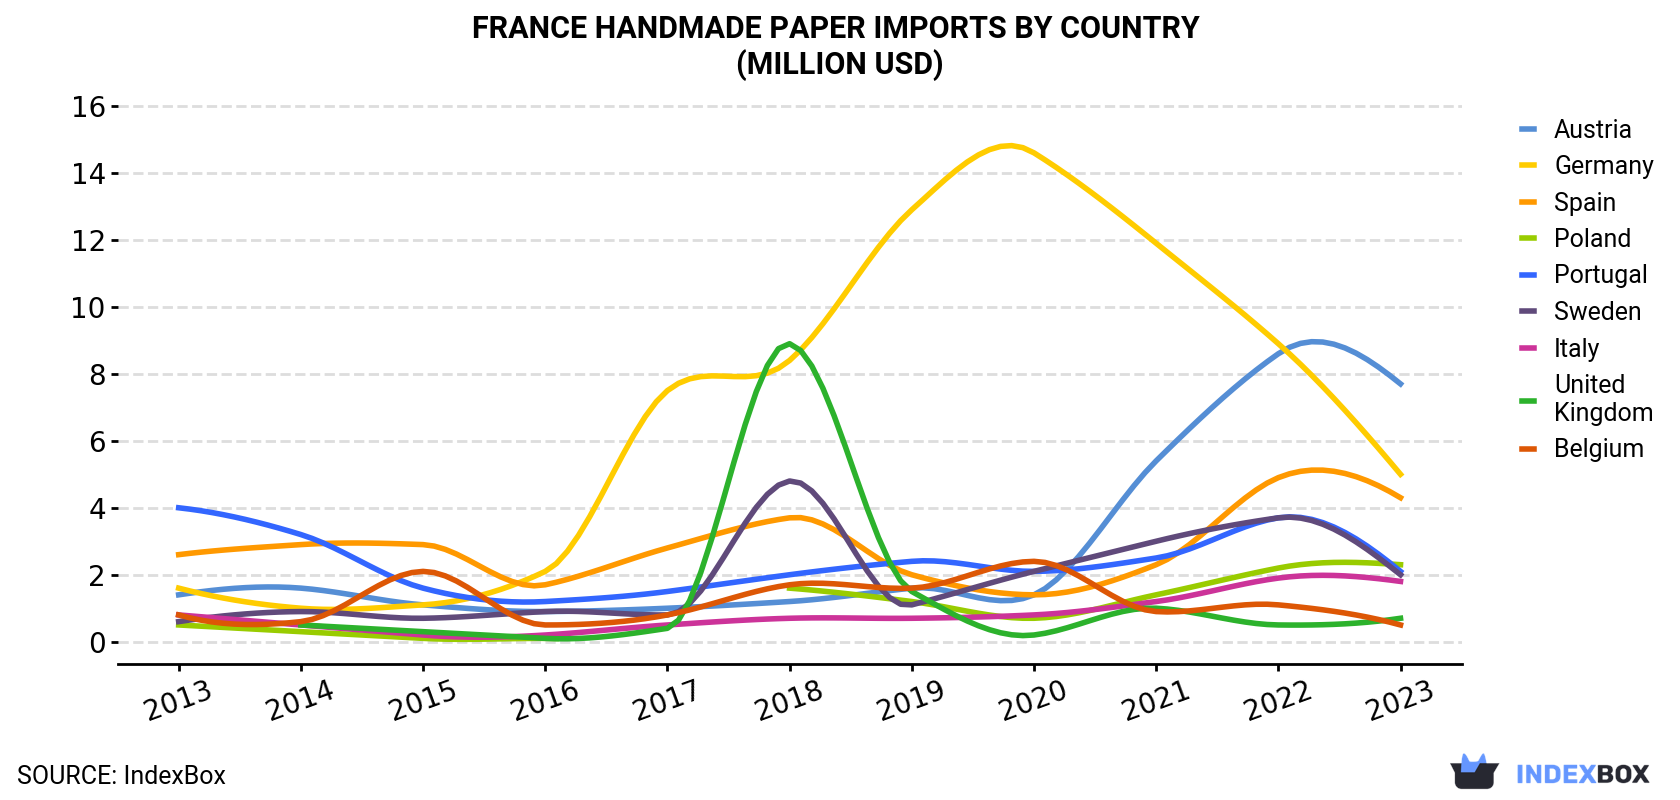 France Handmade Paper Imports By Country (Million USD)